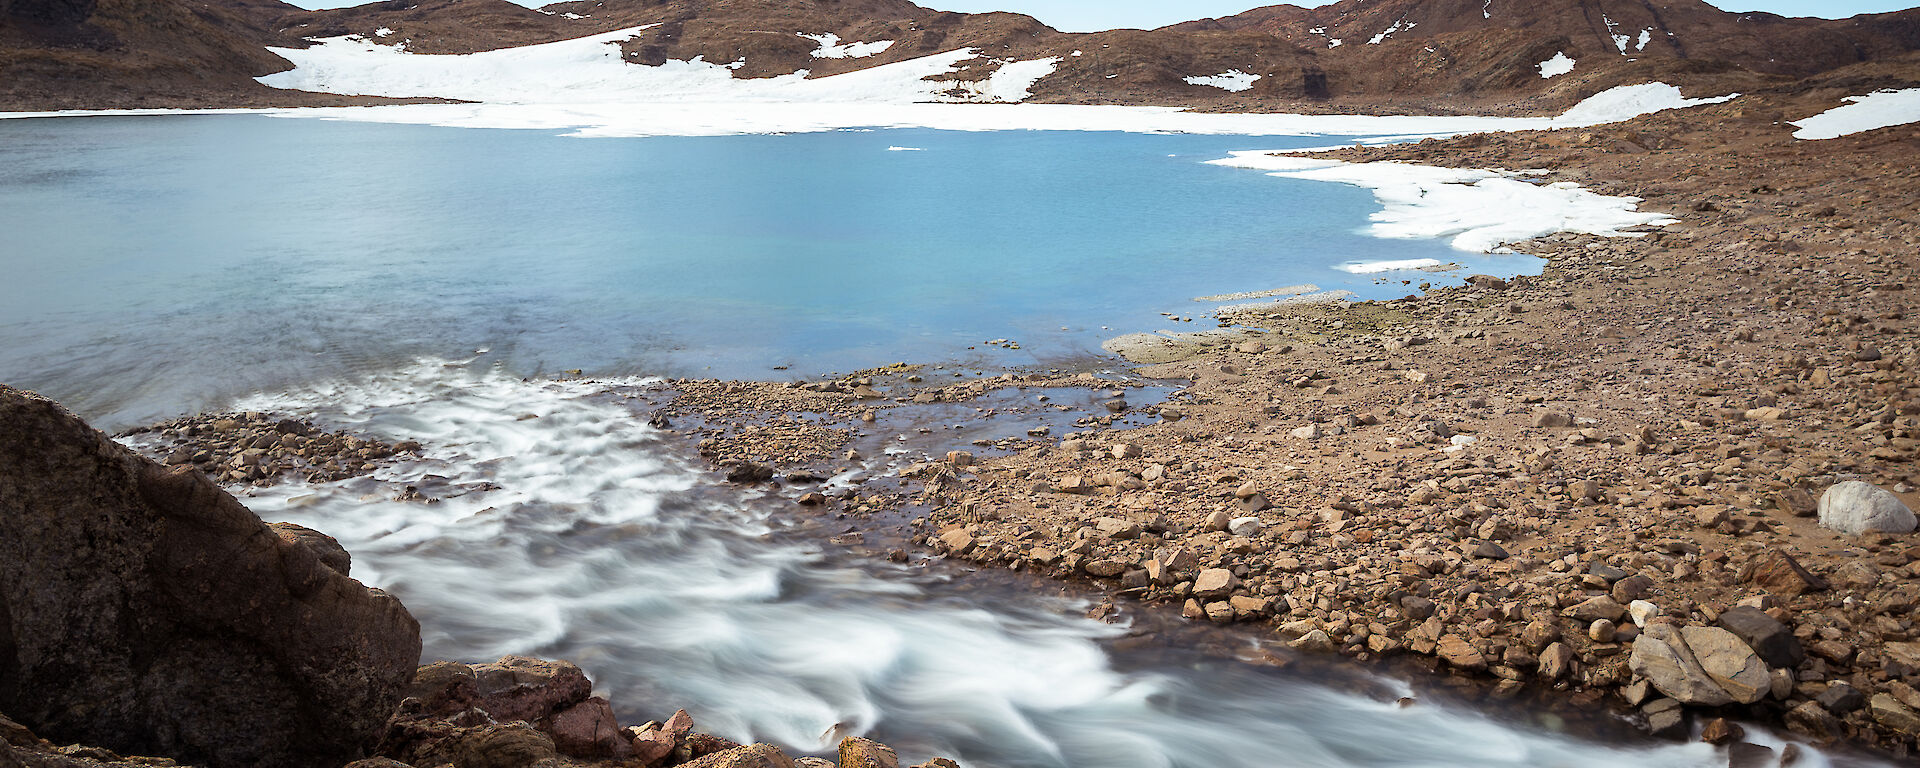 The blue and white Ellis Rapids flowing relentlessly into Ellis Fjord, surrounded by brown hills